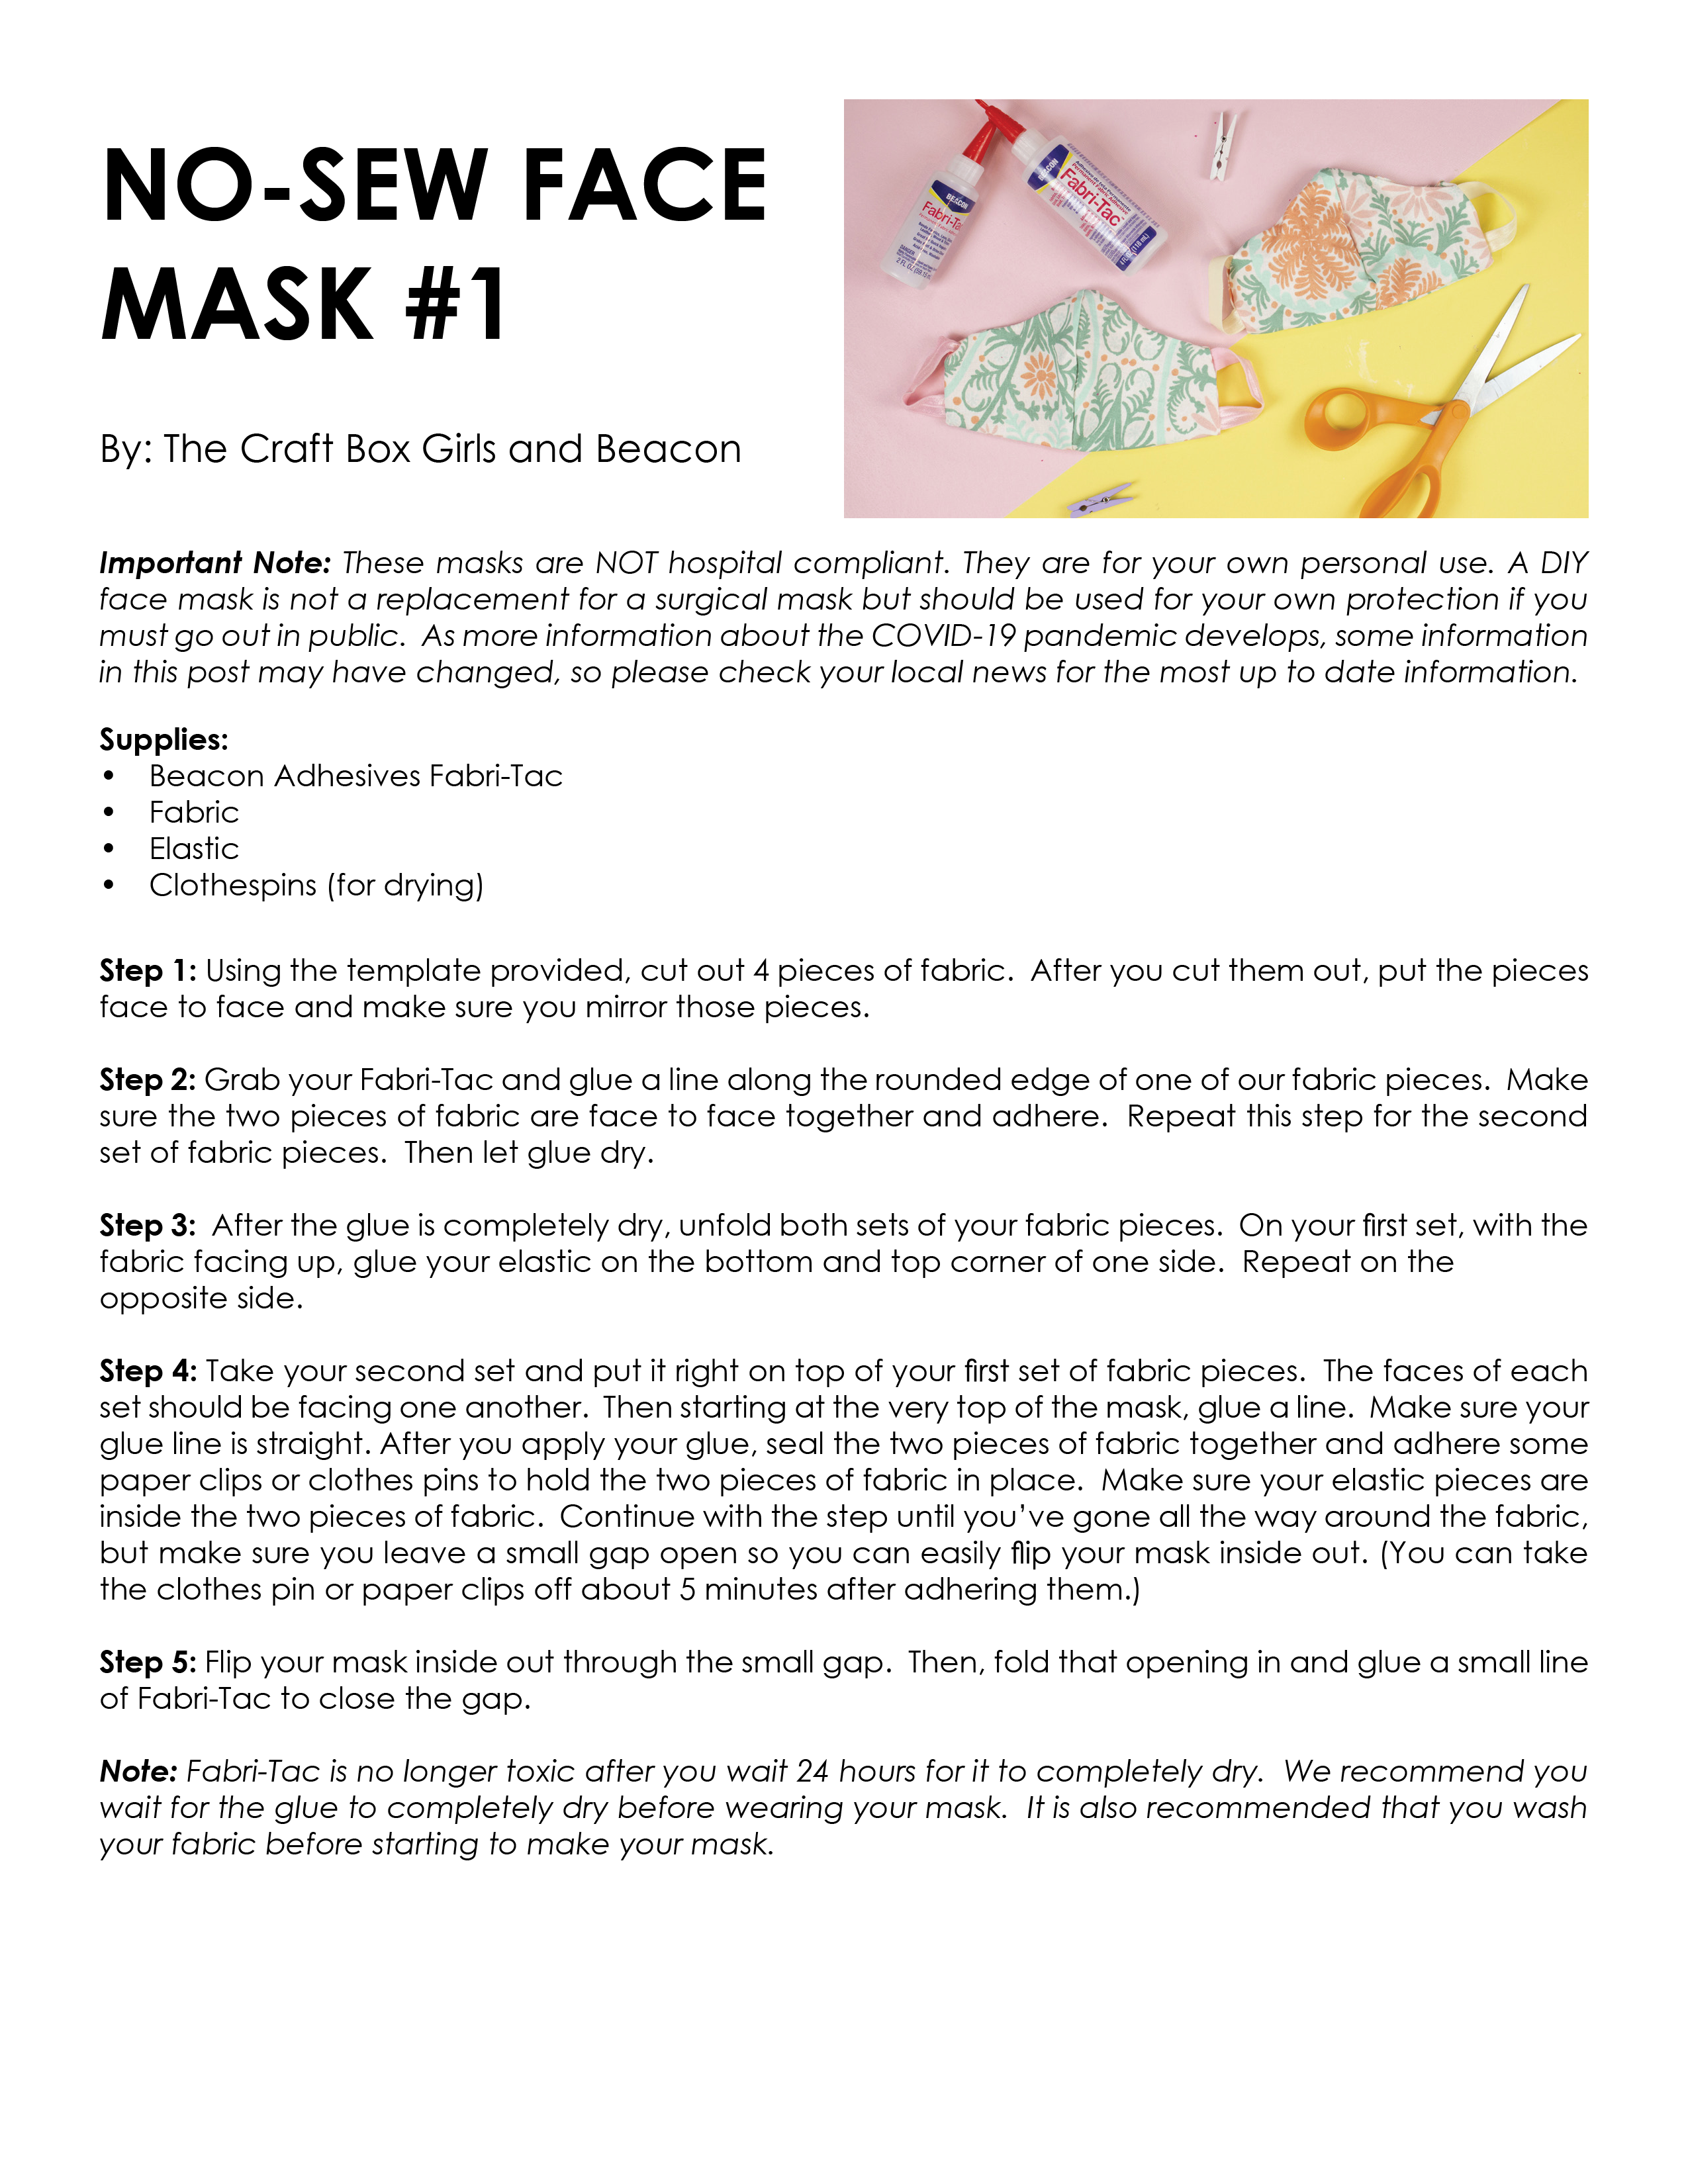 Steps to create your face mask